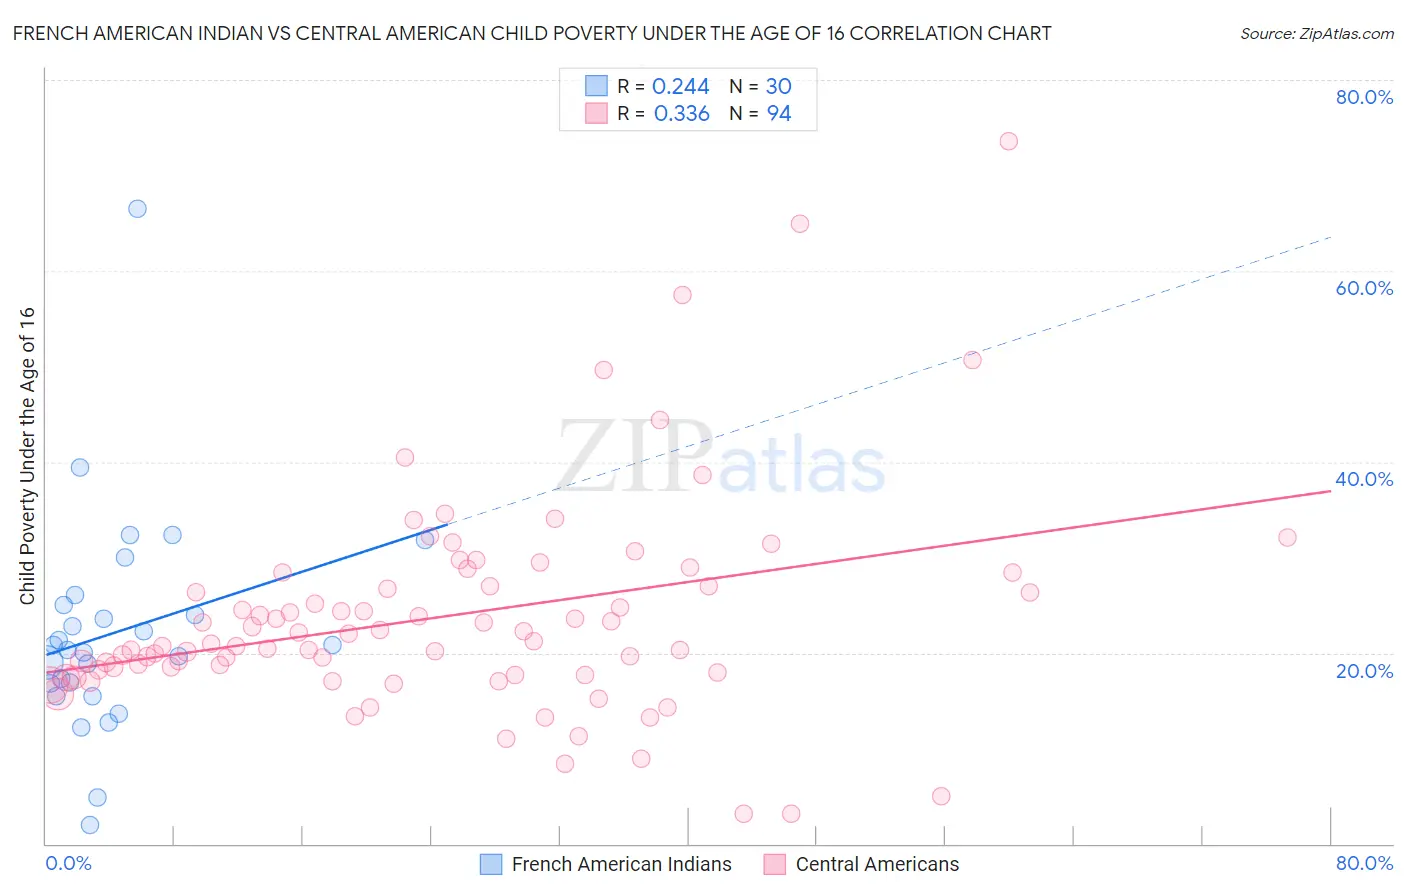 French American Indian vs Central American Child Poverty Under the Age of 16